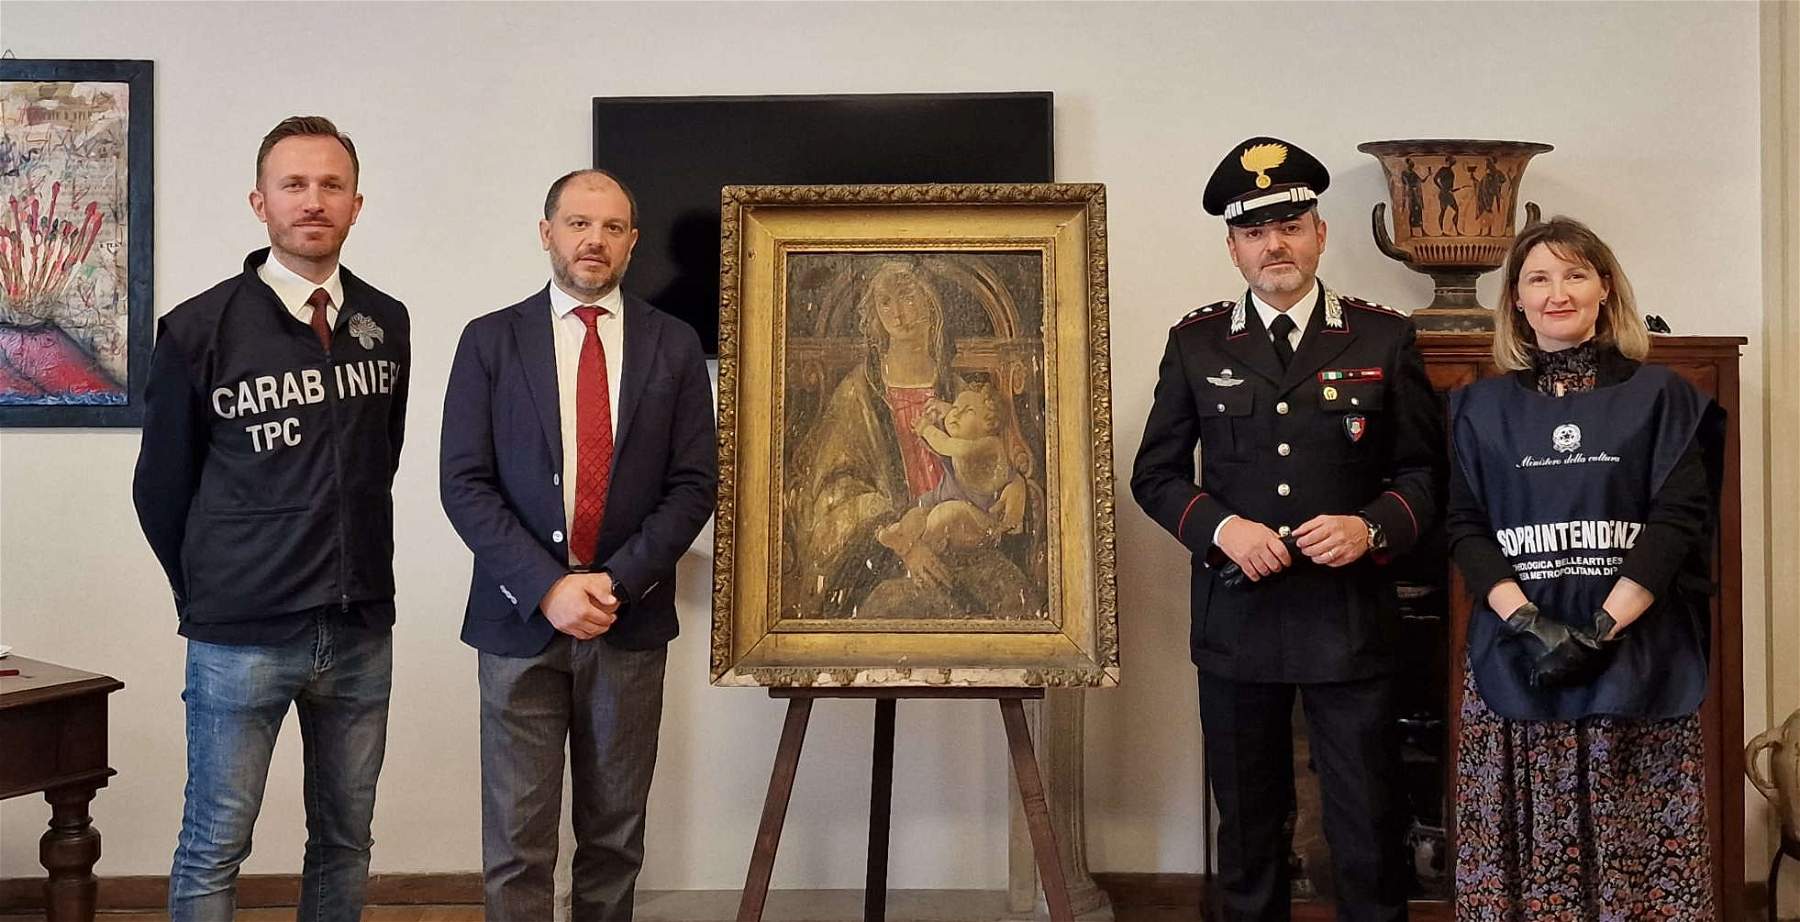 Naples, recovered a Renaissance Madonna attributed to Sandro Botticelli